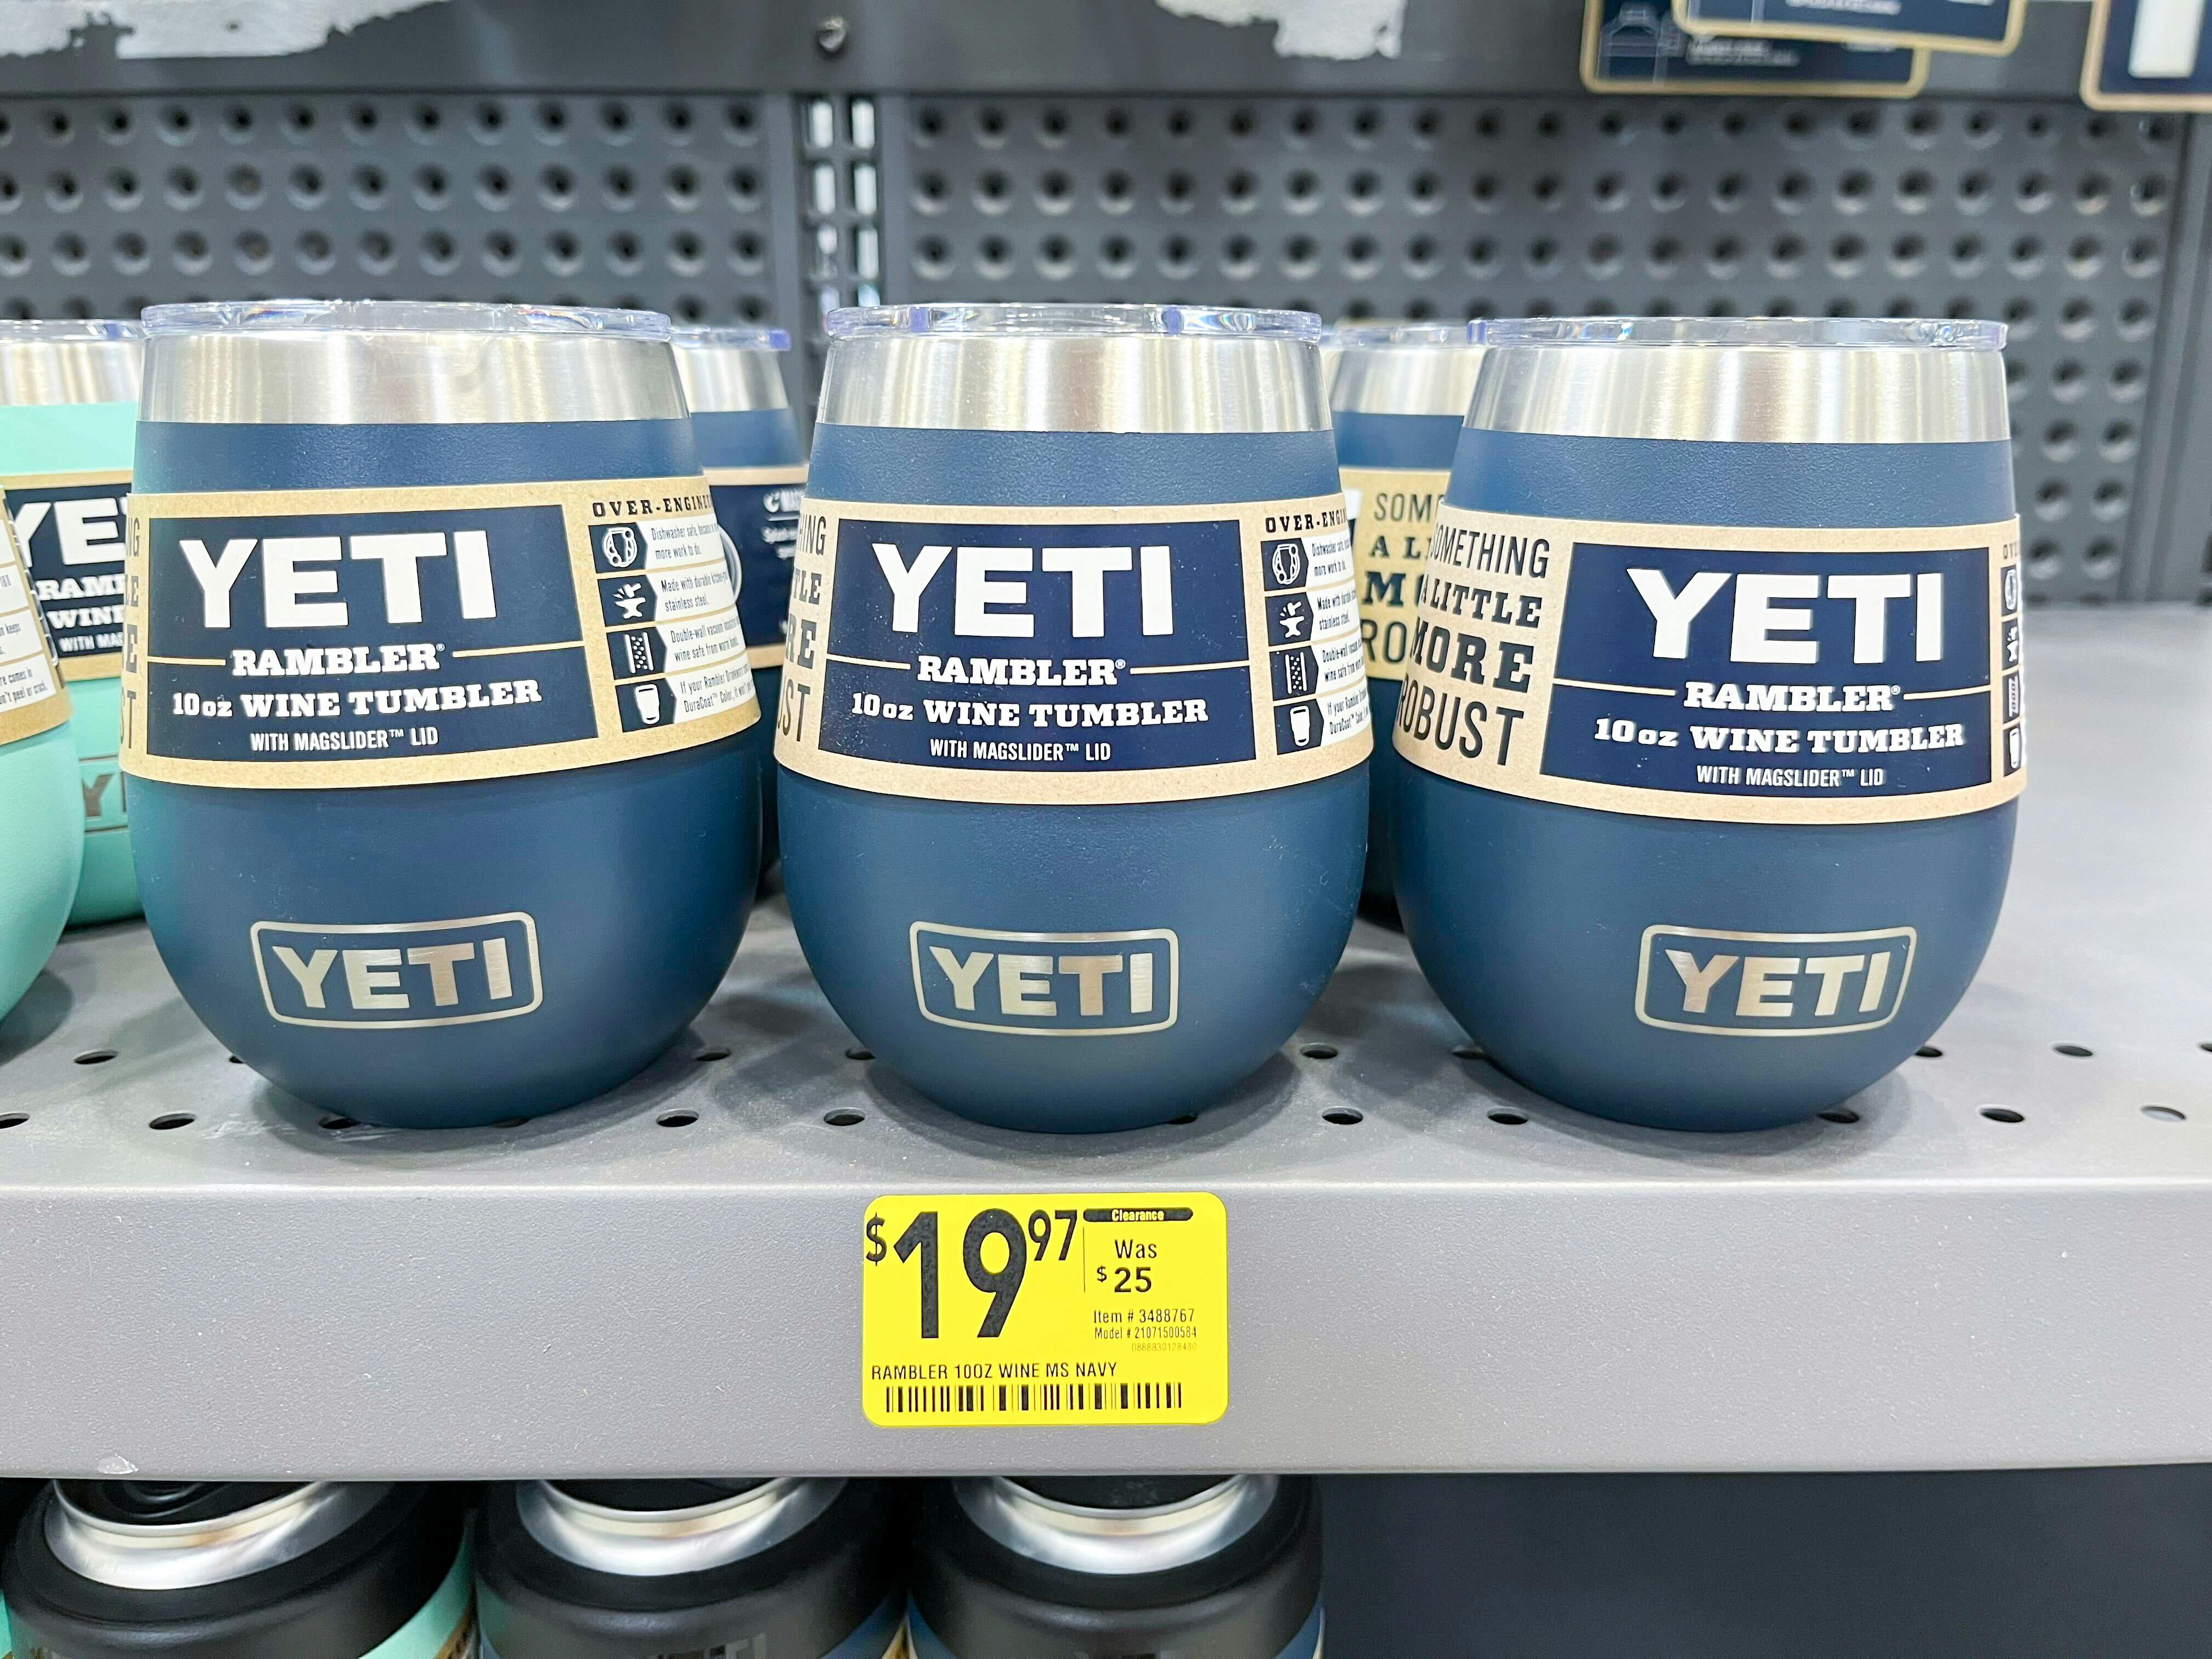 Three navy yeti 10 oz wine tumblers on the shelf at Lowe's, with a $19.97 sale price tag on the shelf